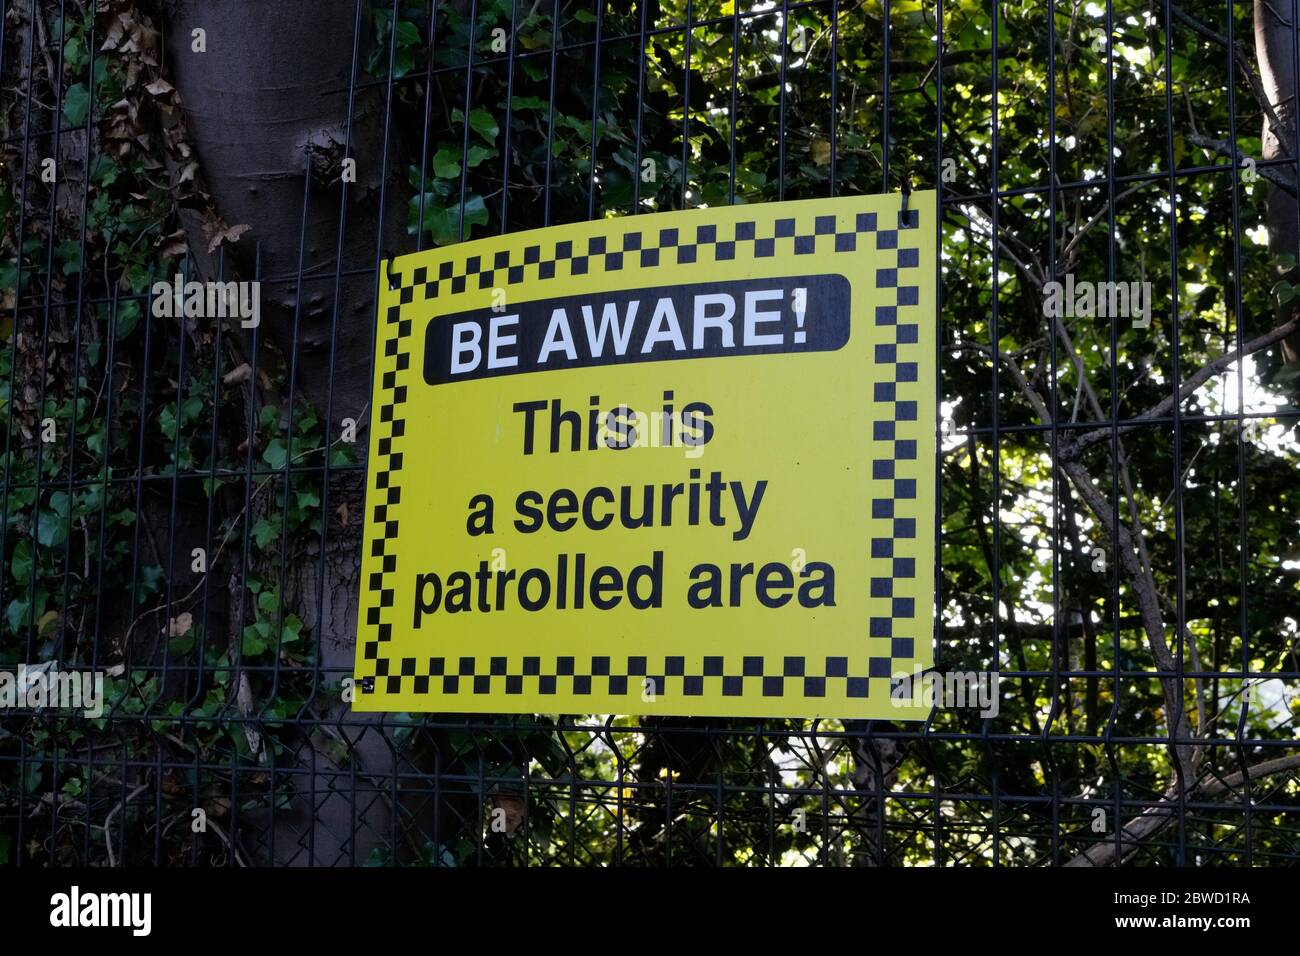 Be aware, This is a security patrolled area sign Stock Photo